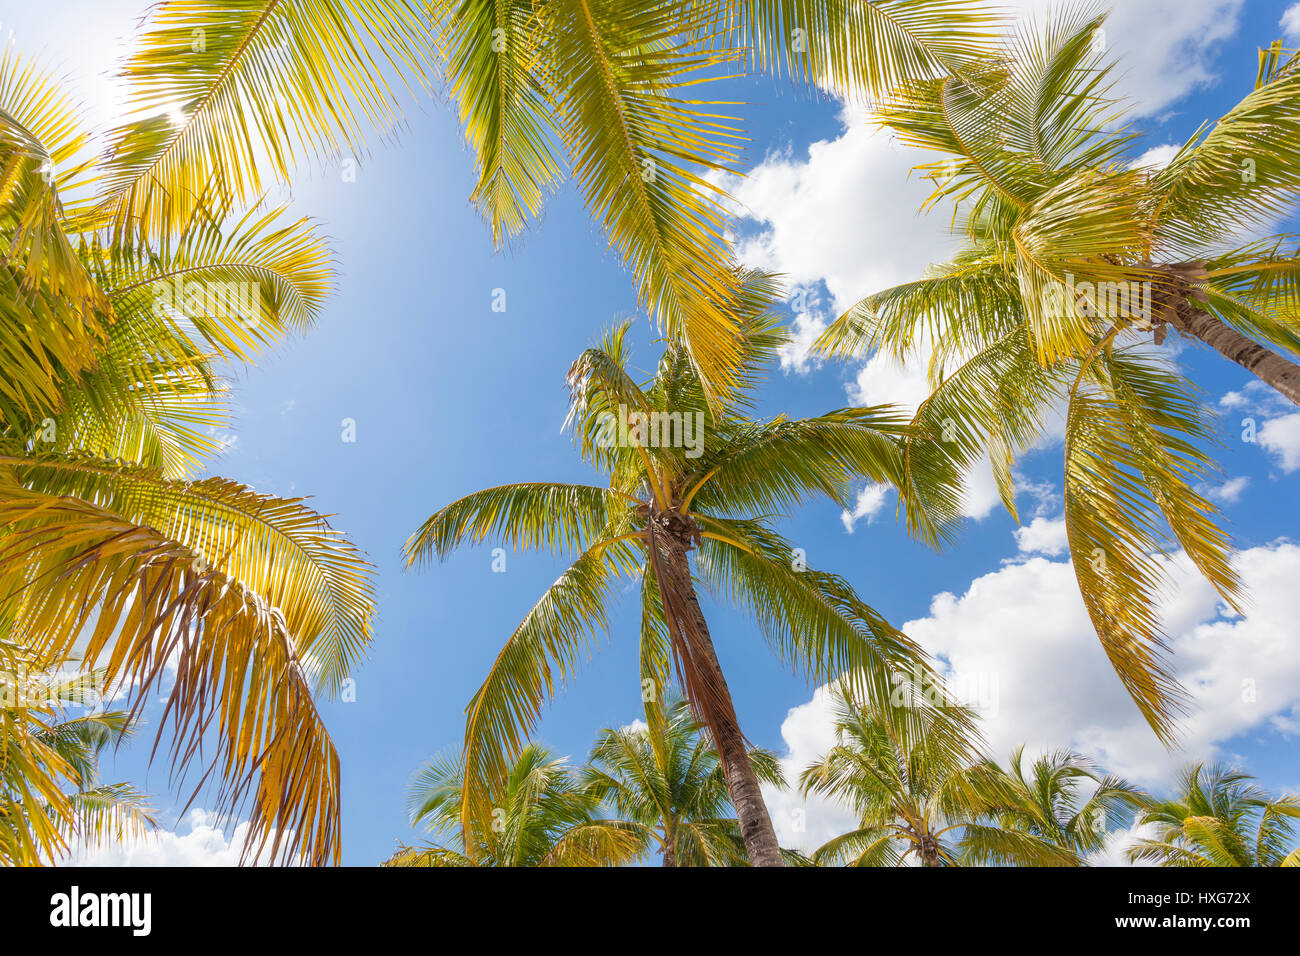 Coconut palm trees in Florida, United States Stock Photo